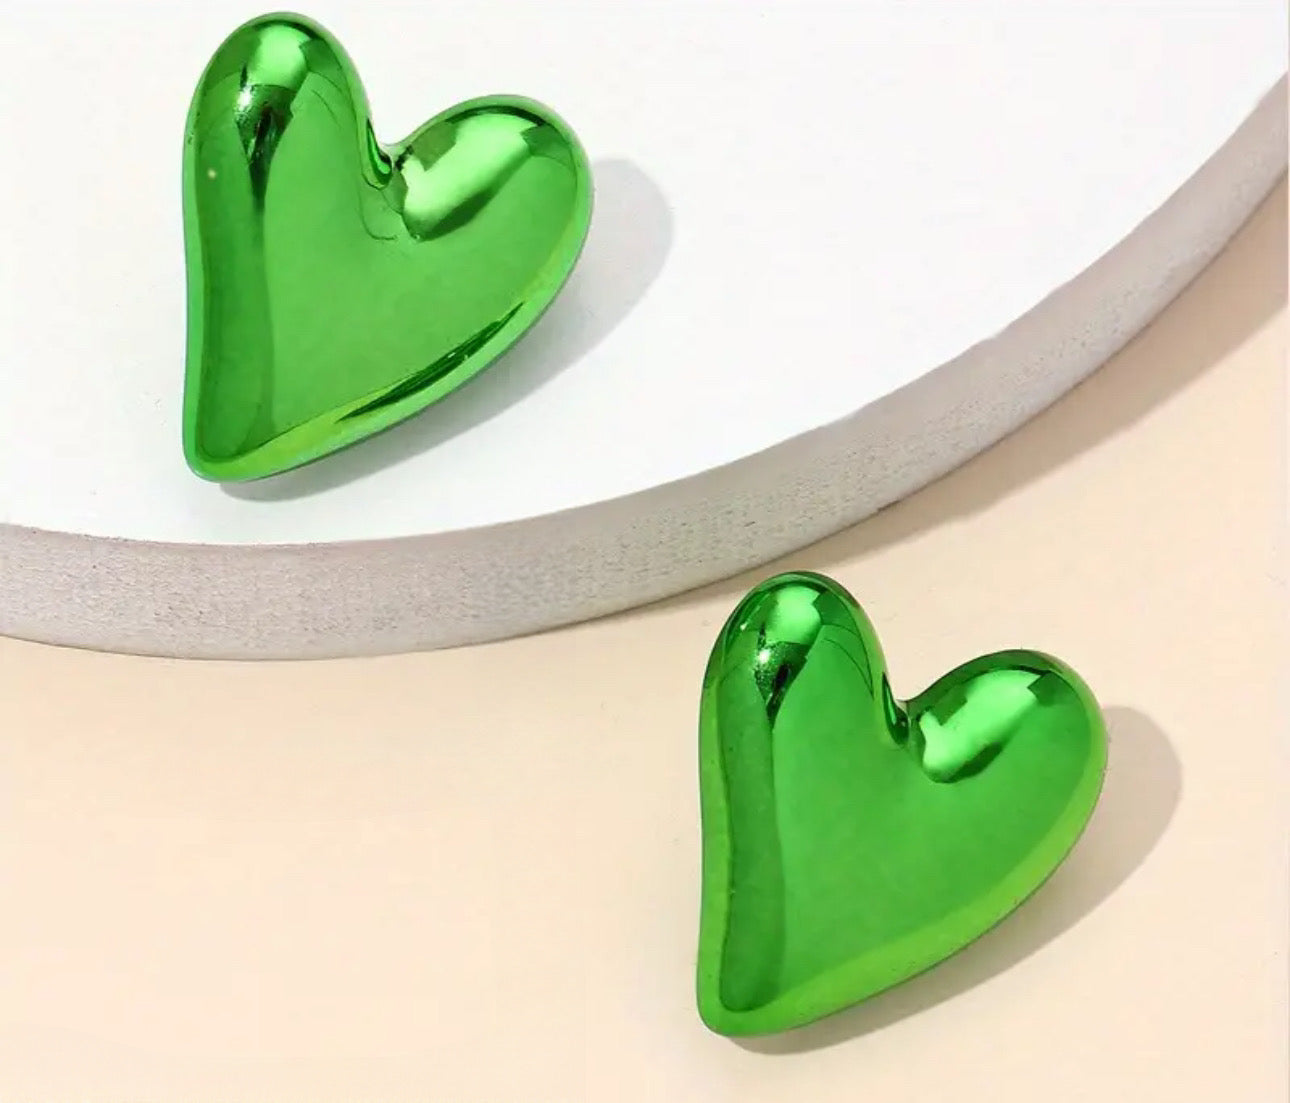 Colorful Glossy Heart Studs